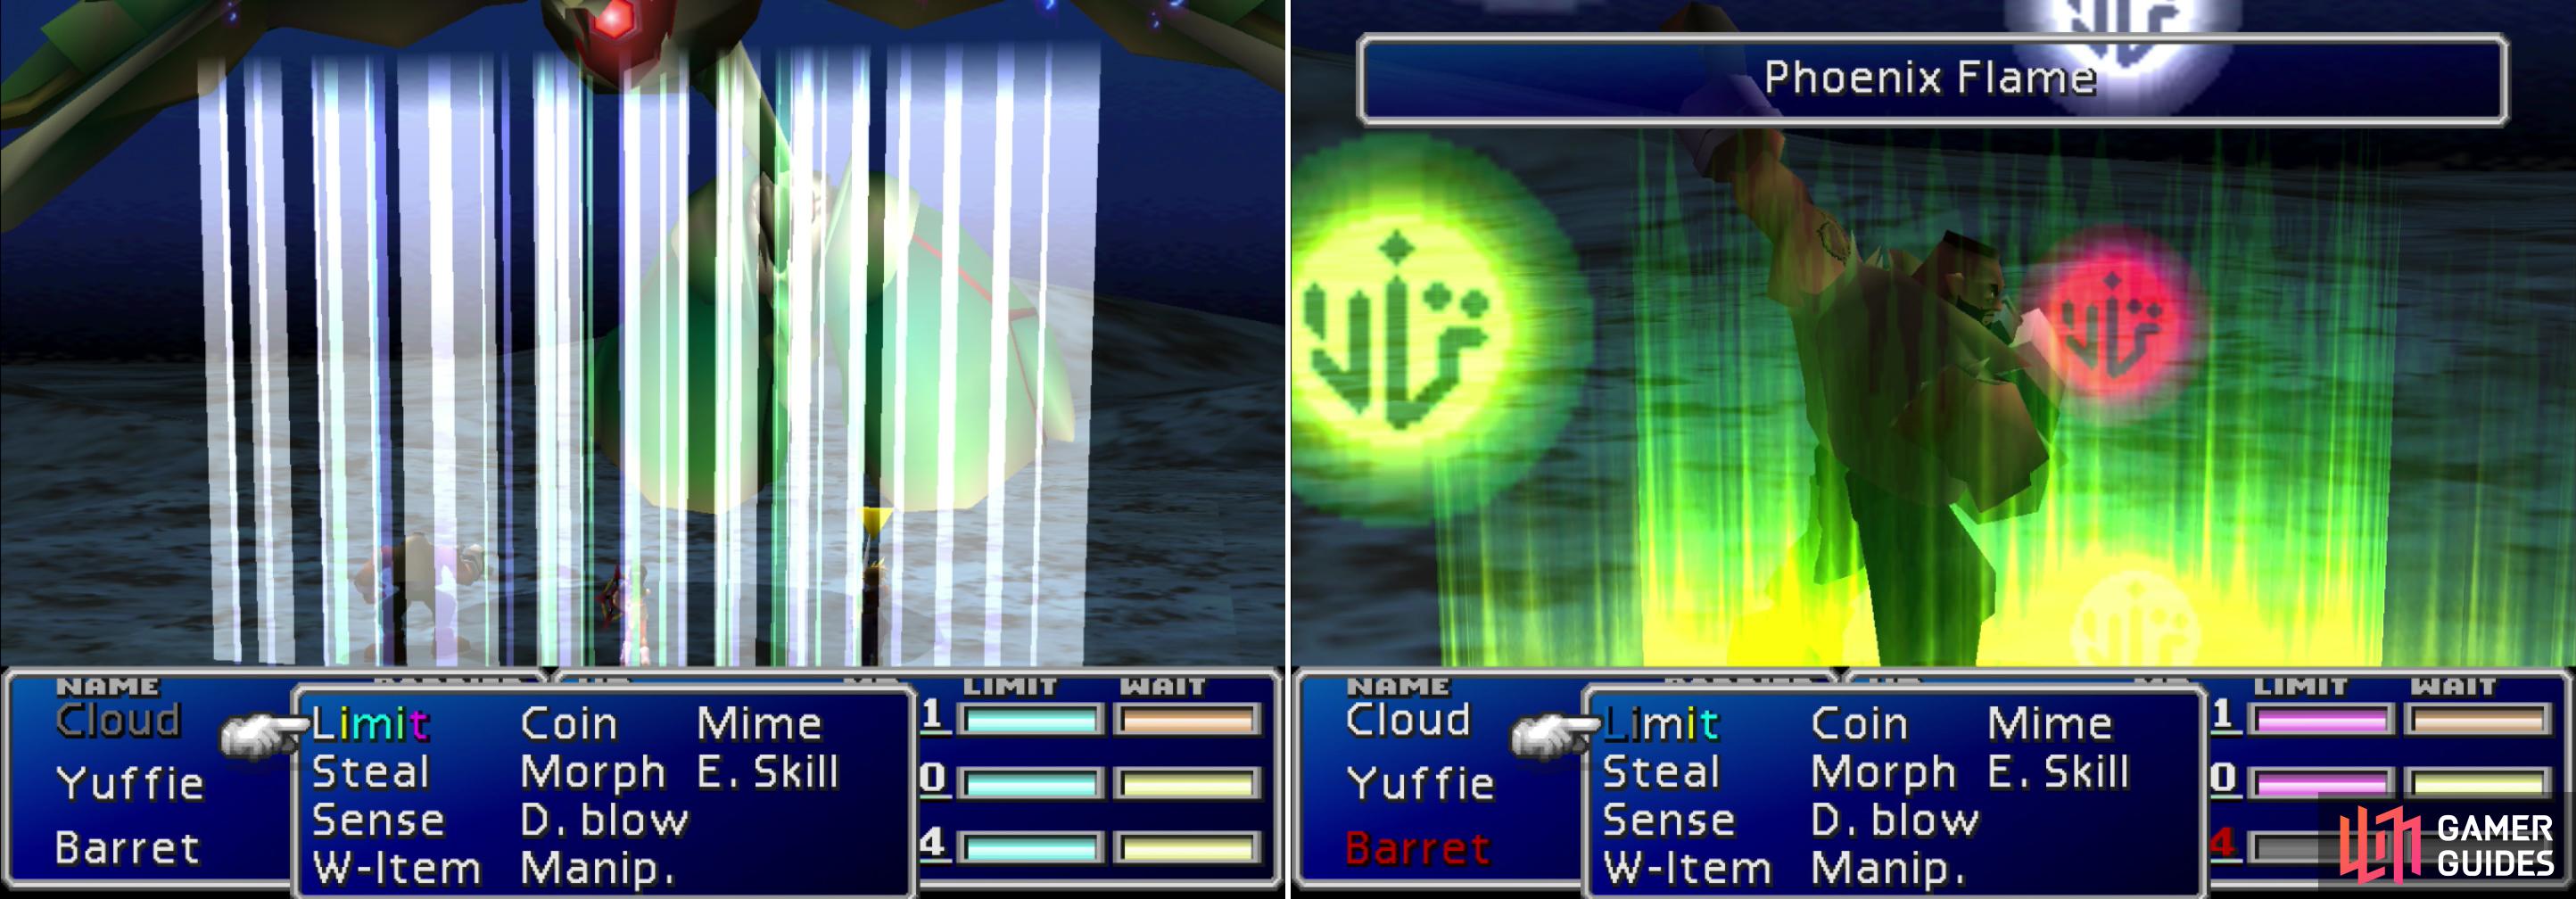 Emerald Weapon's Aire Tam Storm is easily its most dangerous attack, dealing 1111 damage per piece of Materia a character has equipped (left). Having Phoenix + Final Attack Materia equipped will revive the party in case they get wiped out (right).